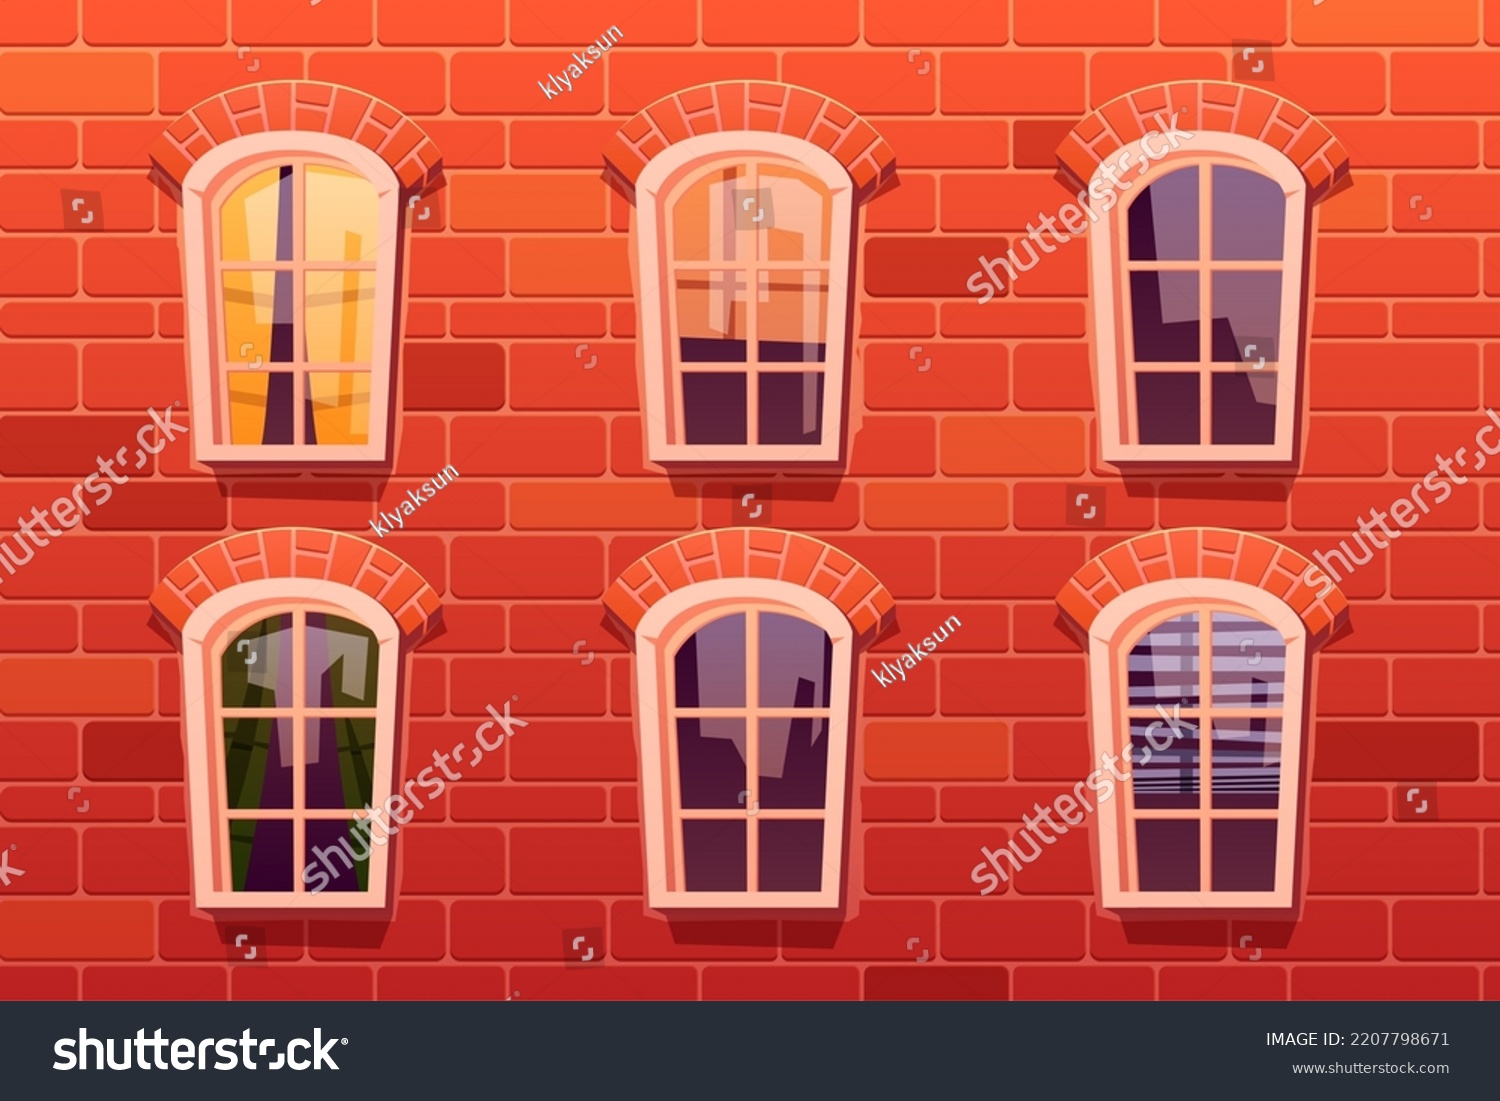 SVG of Classic arched windows on red brick wall with curtains and blinds, city reflection in glass. Cartoon vector illustration of apartment building facade. Urban architecture background. Real estate svg